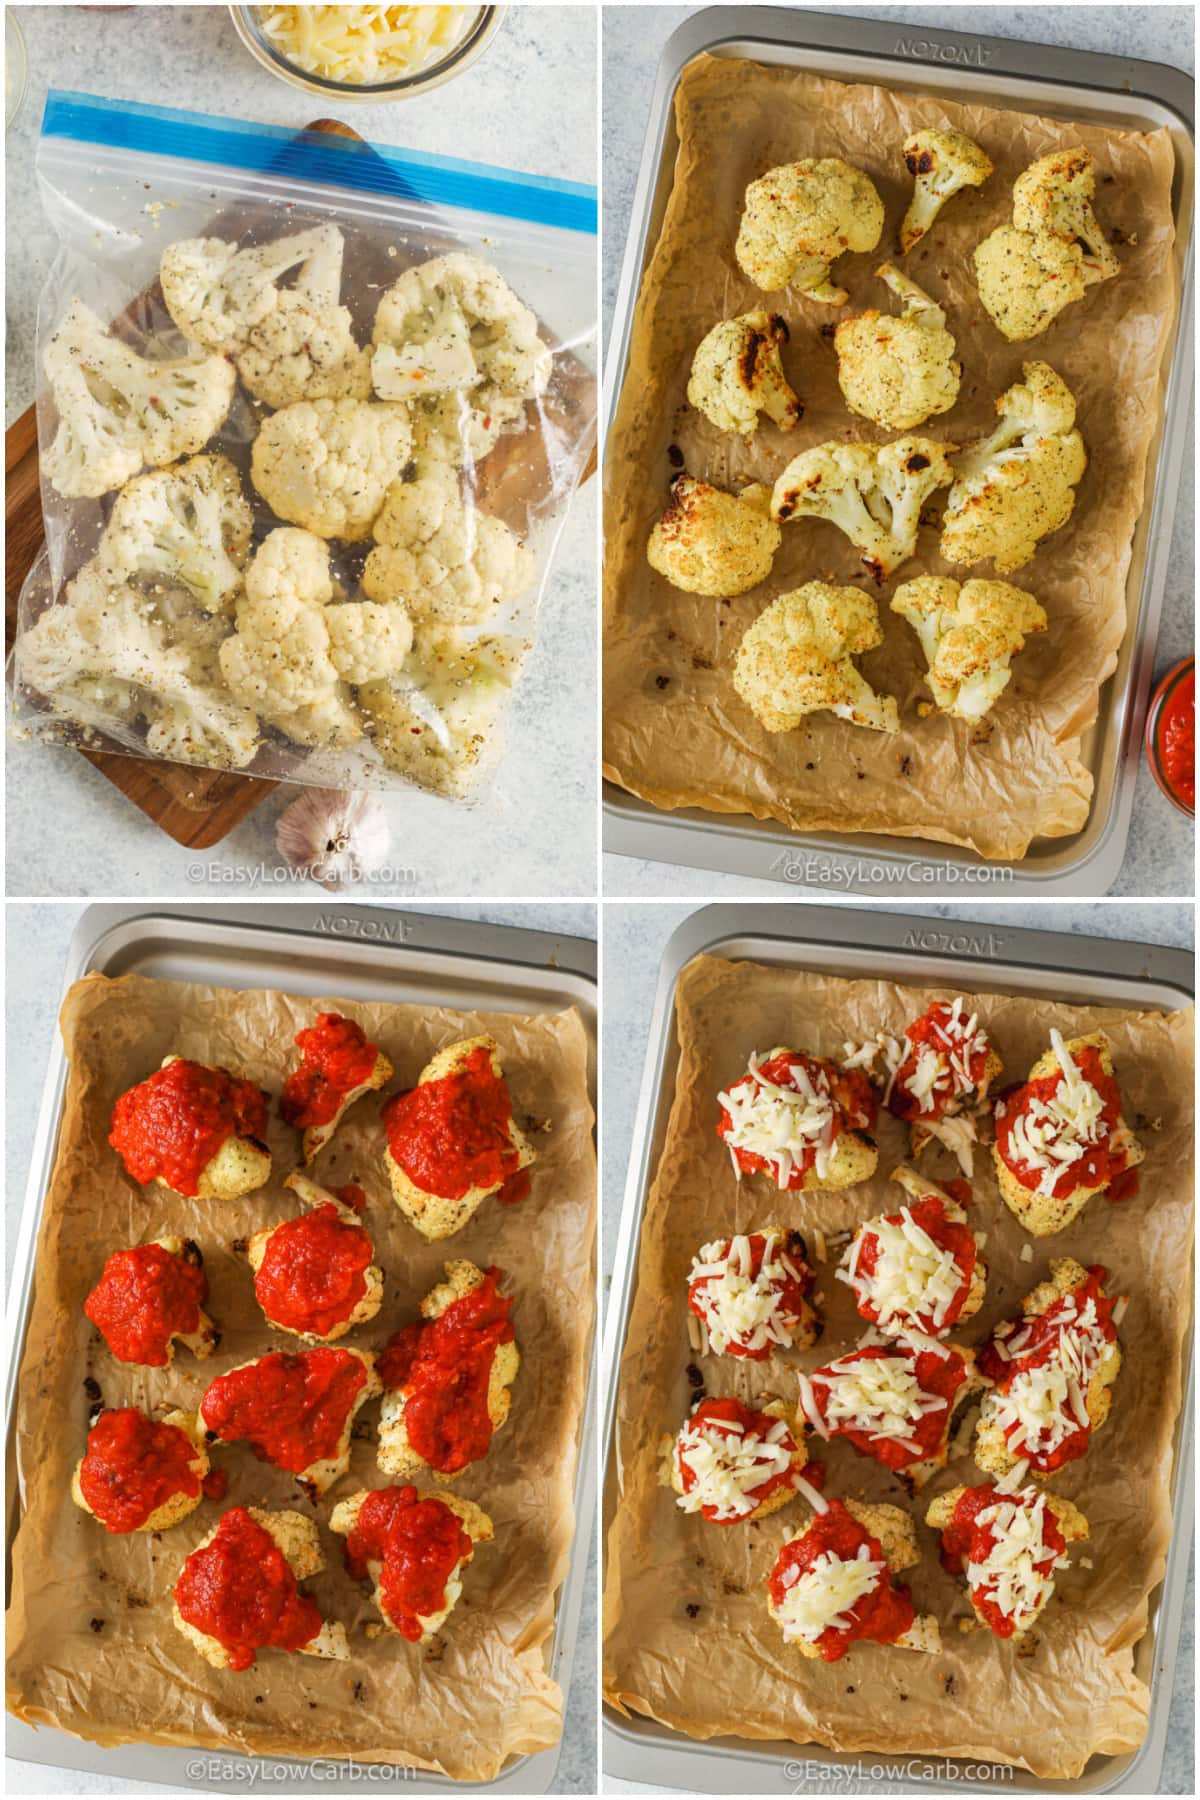 process of making Cauliflower Parmesan, from seasoning the cauliflower, baking cauliflower, adding the sauce and cheese.